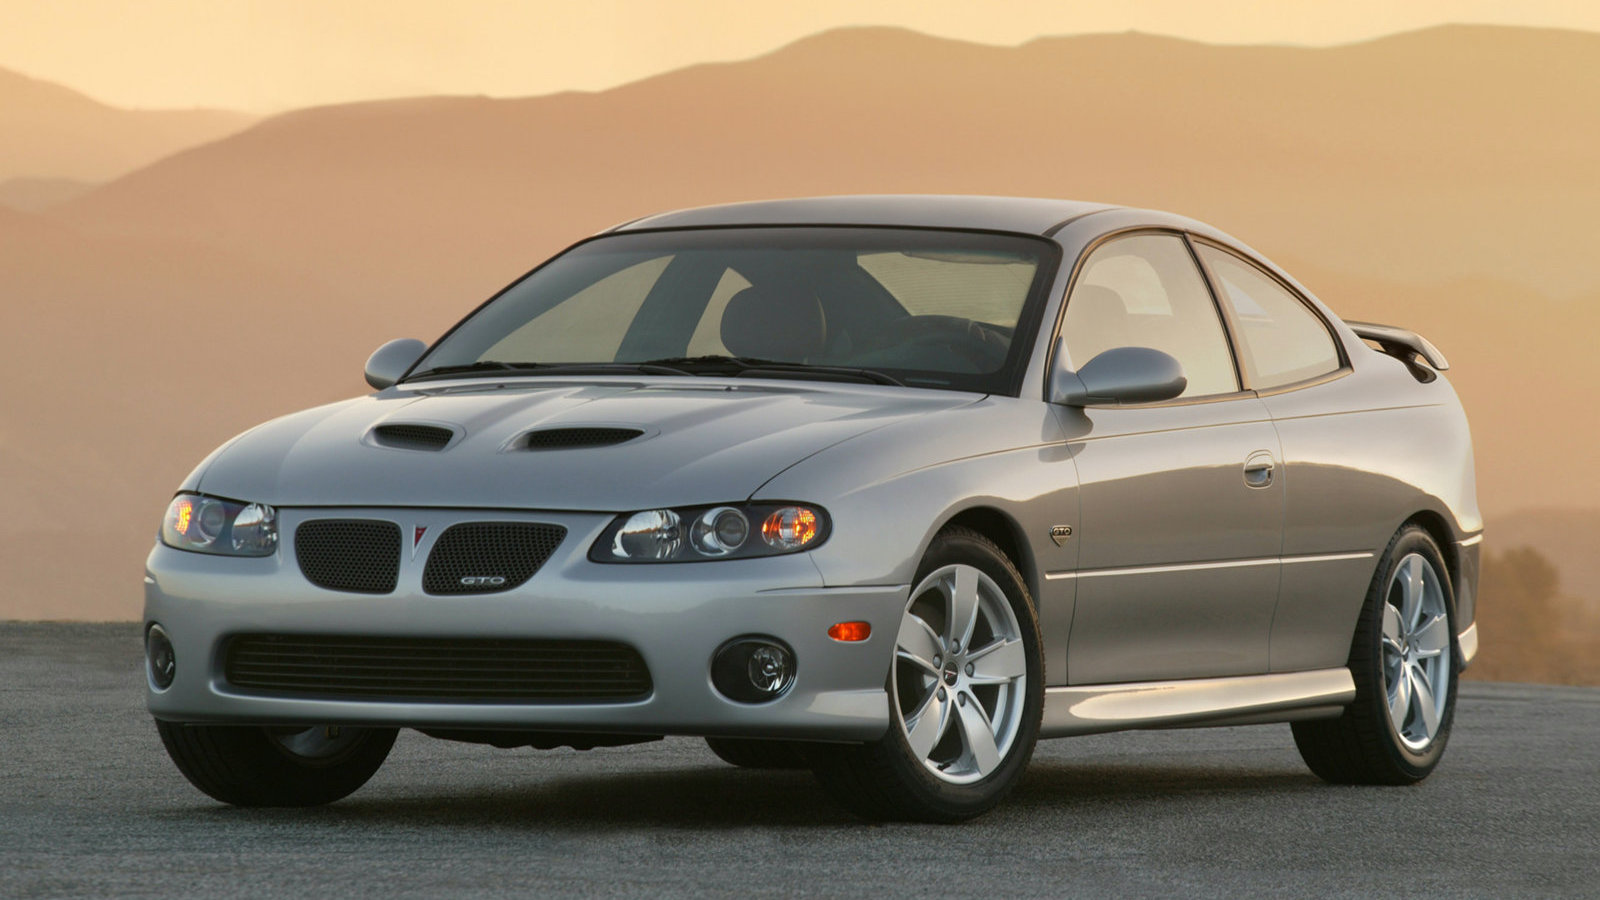 Pontiac GTO Coupe: Models, Generations and Details